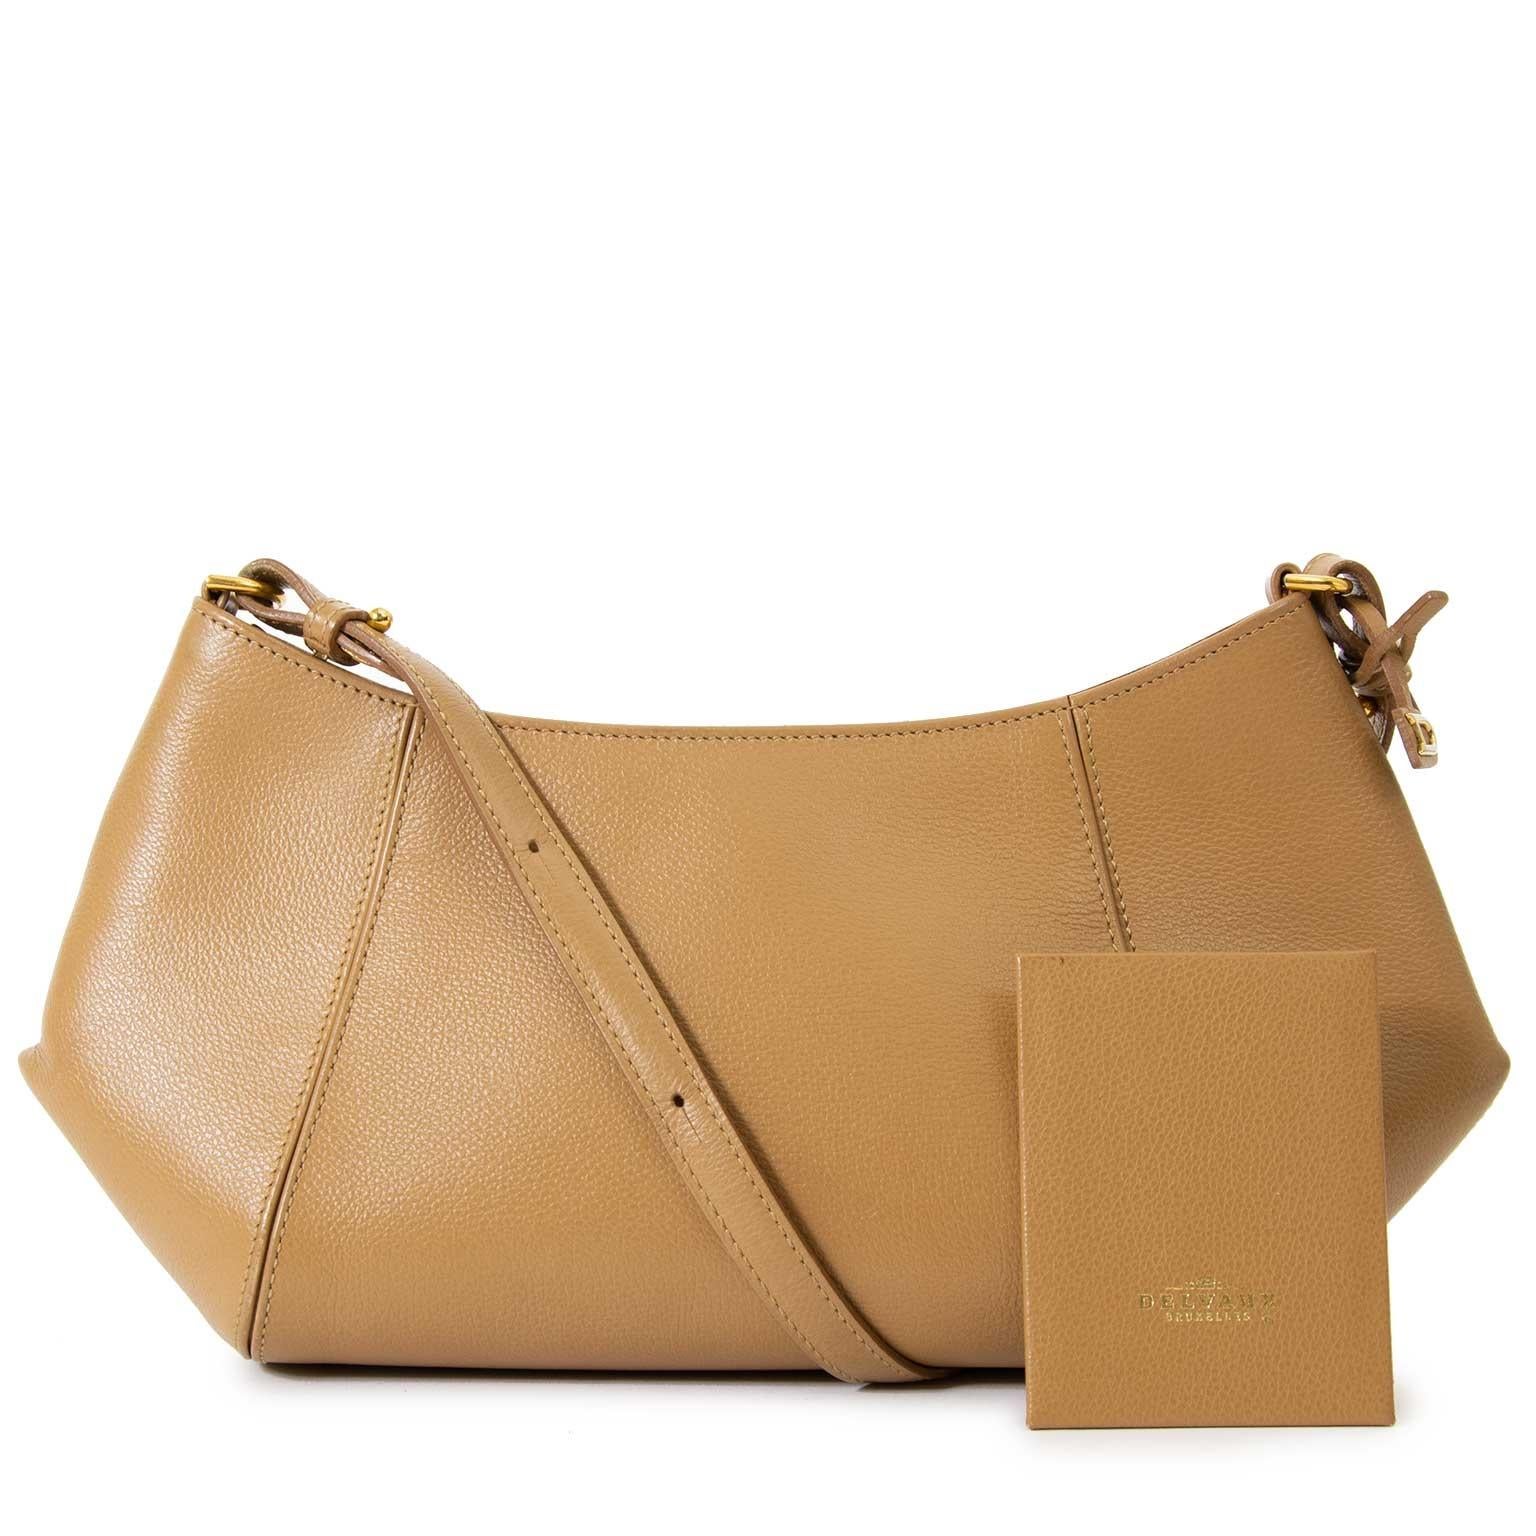 Very good condition

Delvaux Beige Desir Shoulder Bag

This beautiful Delvaux bag is crafted in beige nude leather and features gold-tone details.
It opens with a gold-toned zipper, that gives access to a suede lined interior with two open